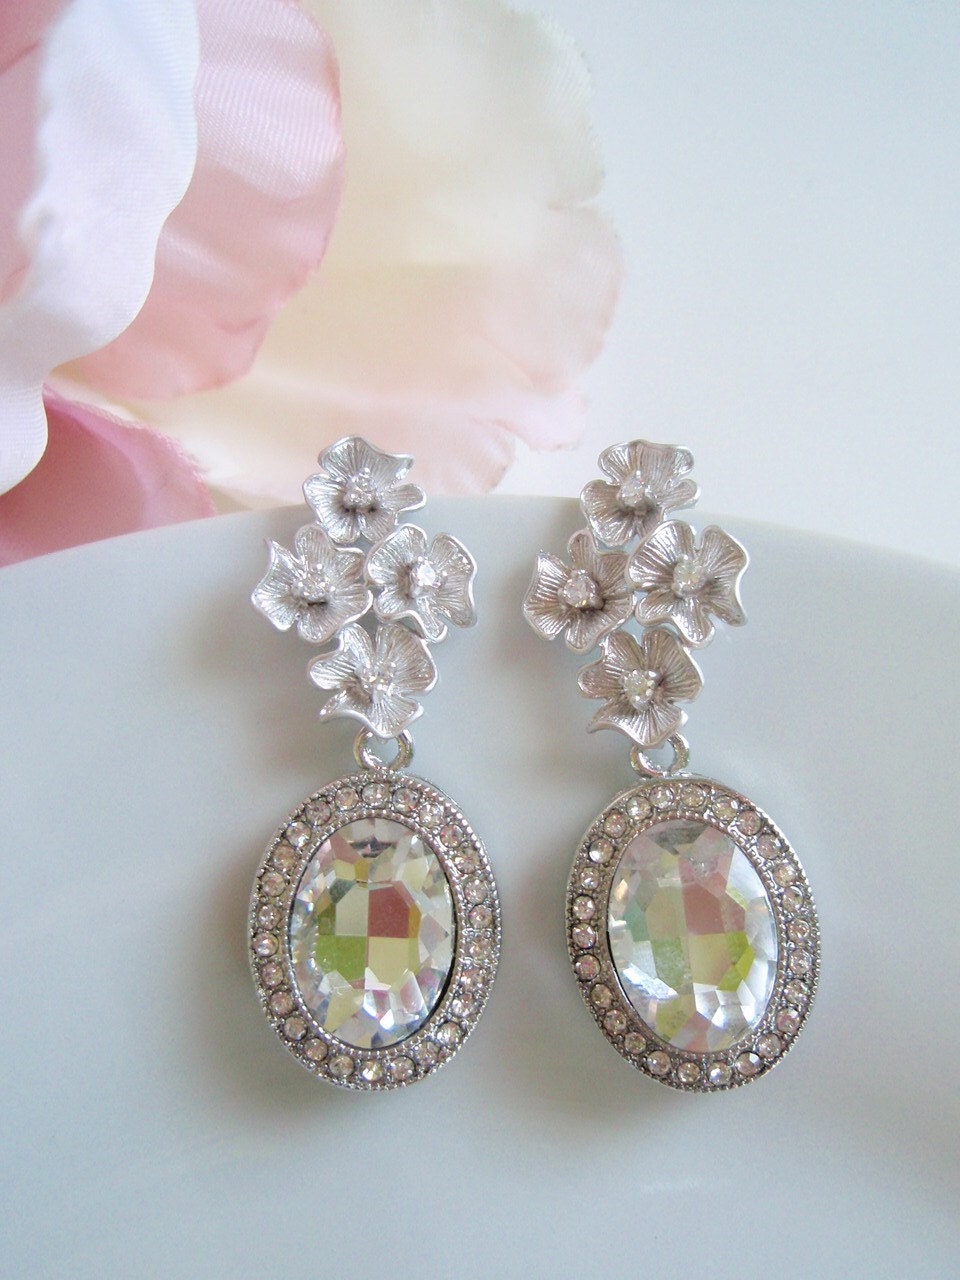 MAIVE - White Gold and Crystal Vintage Inspired Earrings